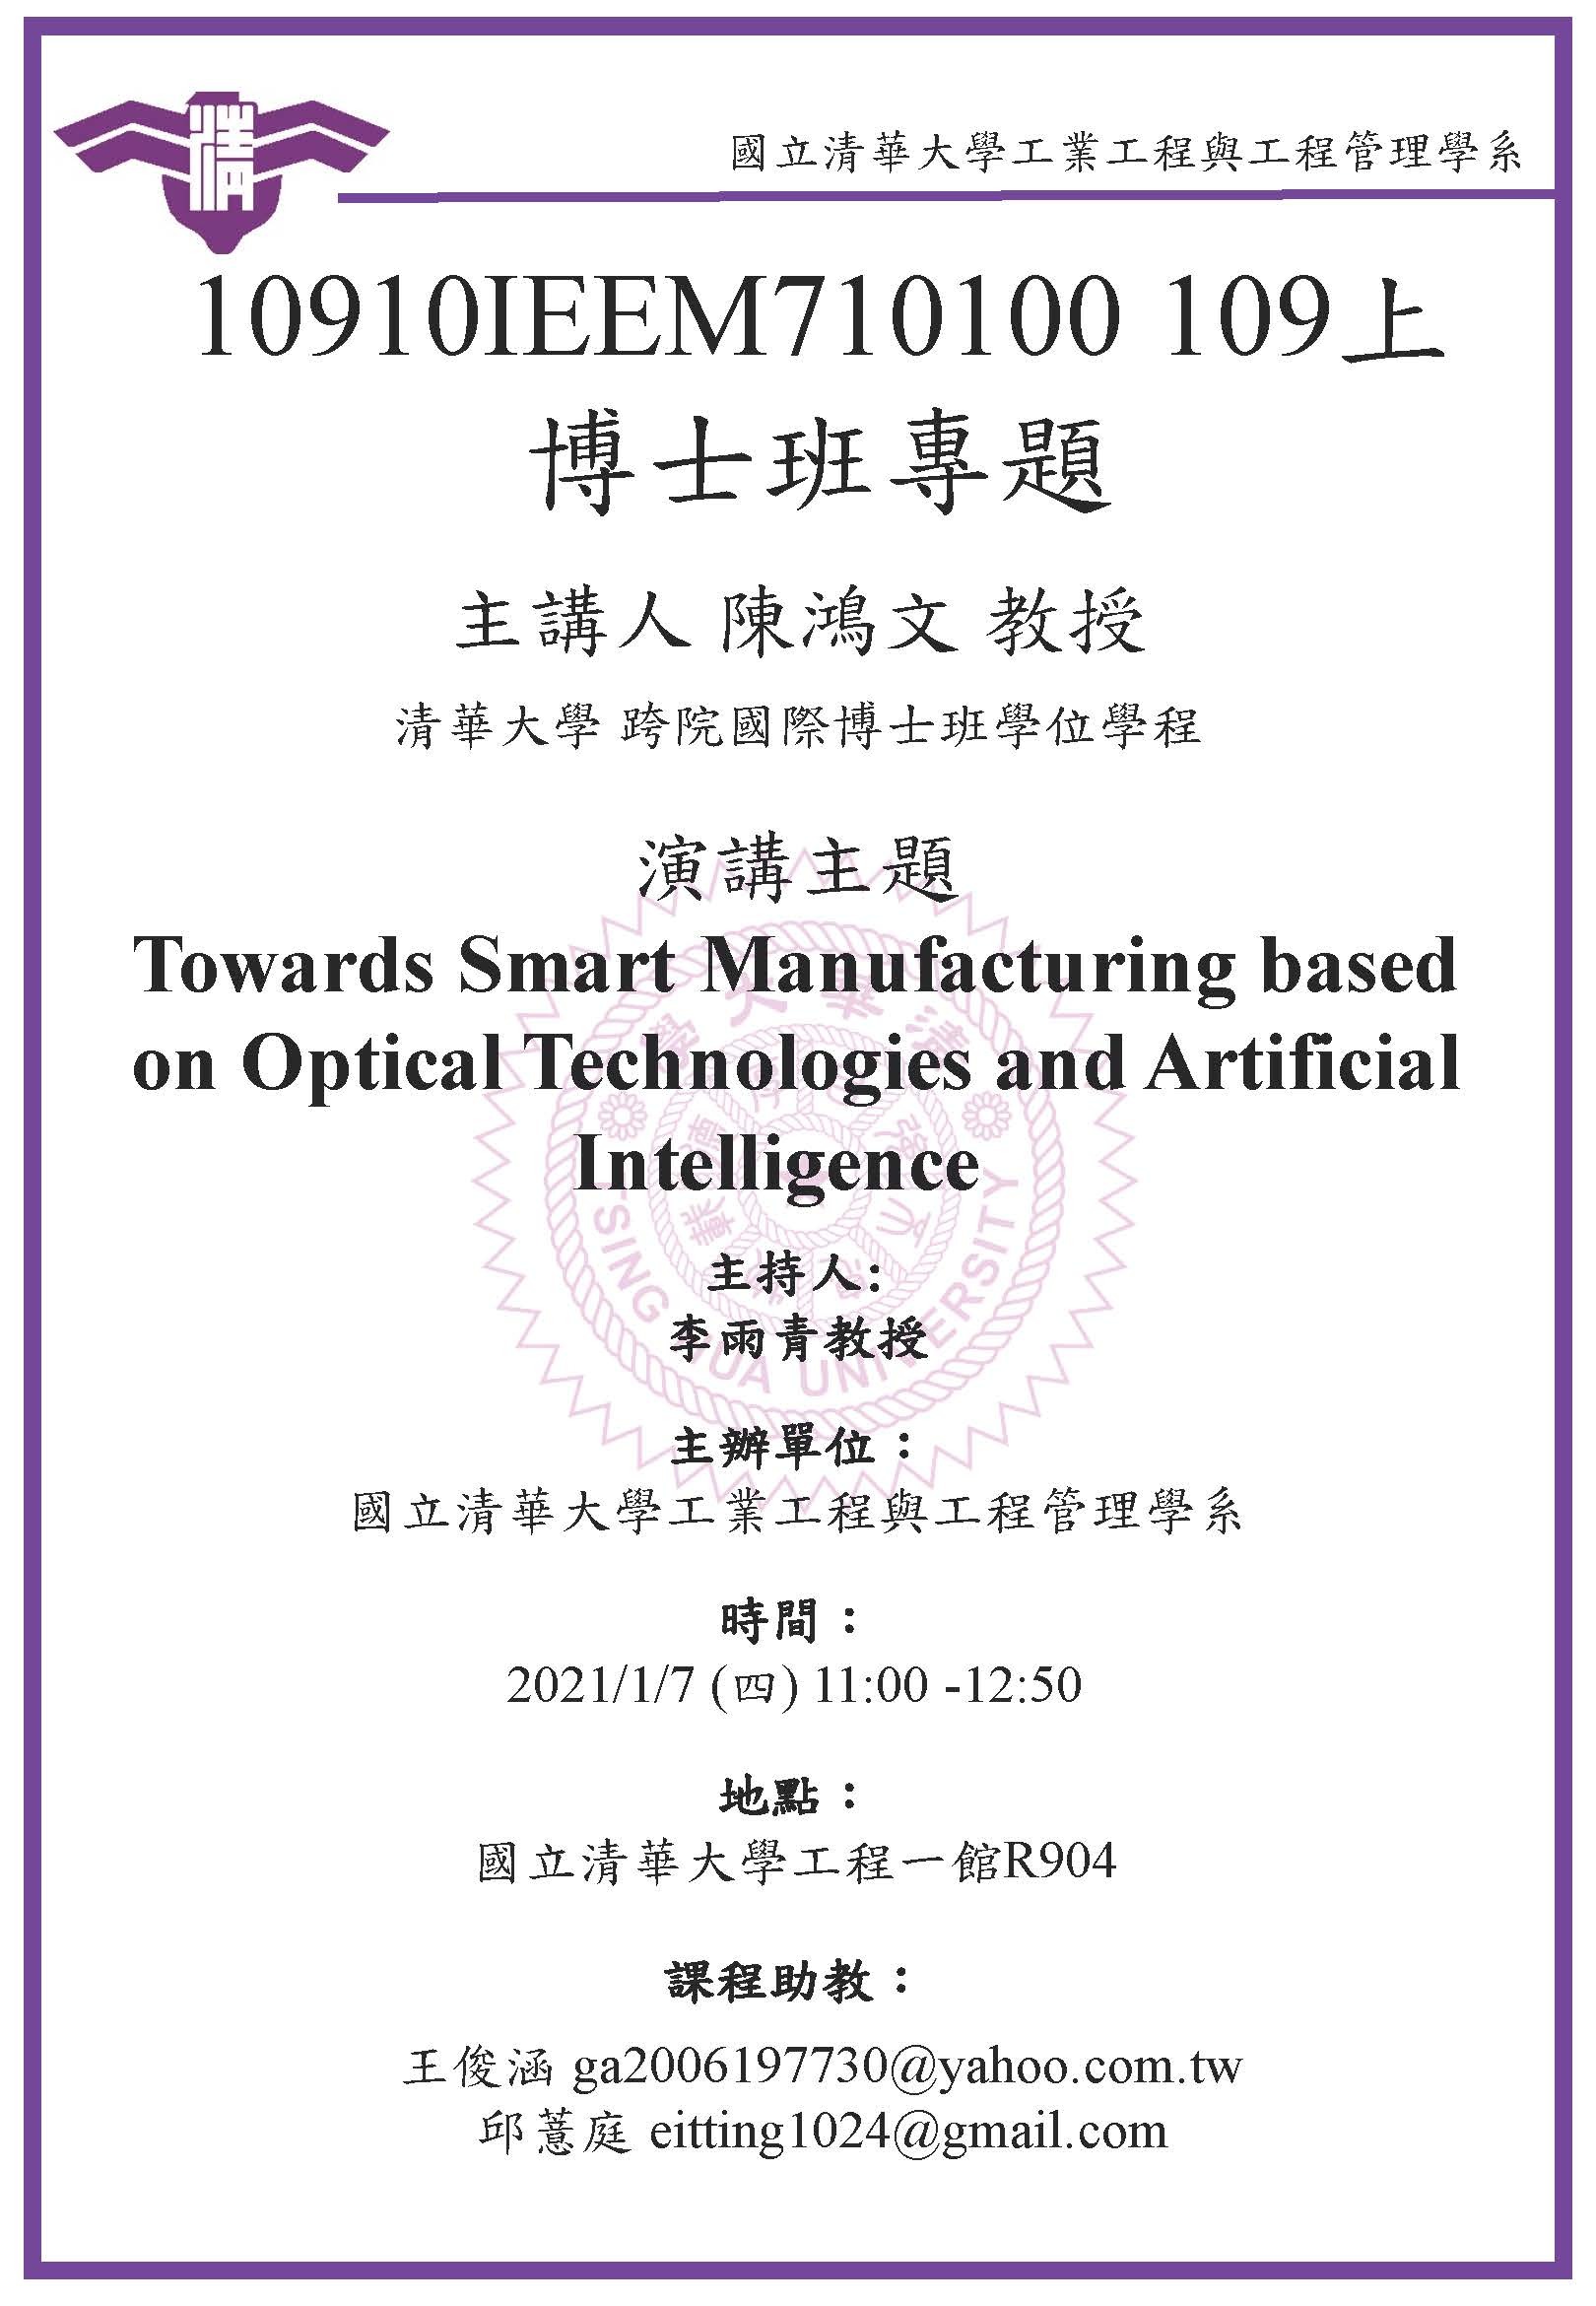 Towards Smart Manufacturing based on Optical Technologies and Artificial Intelligence